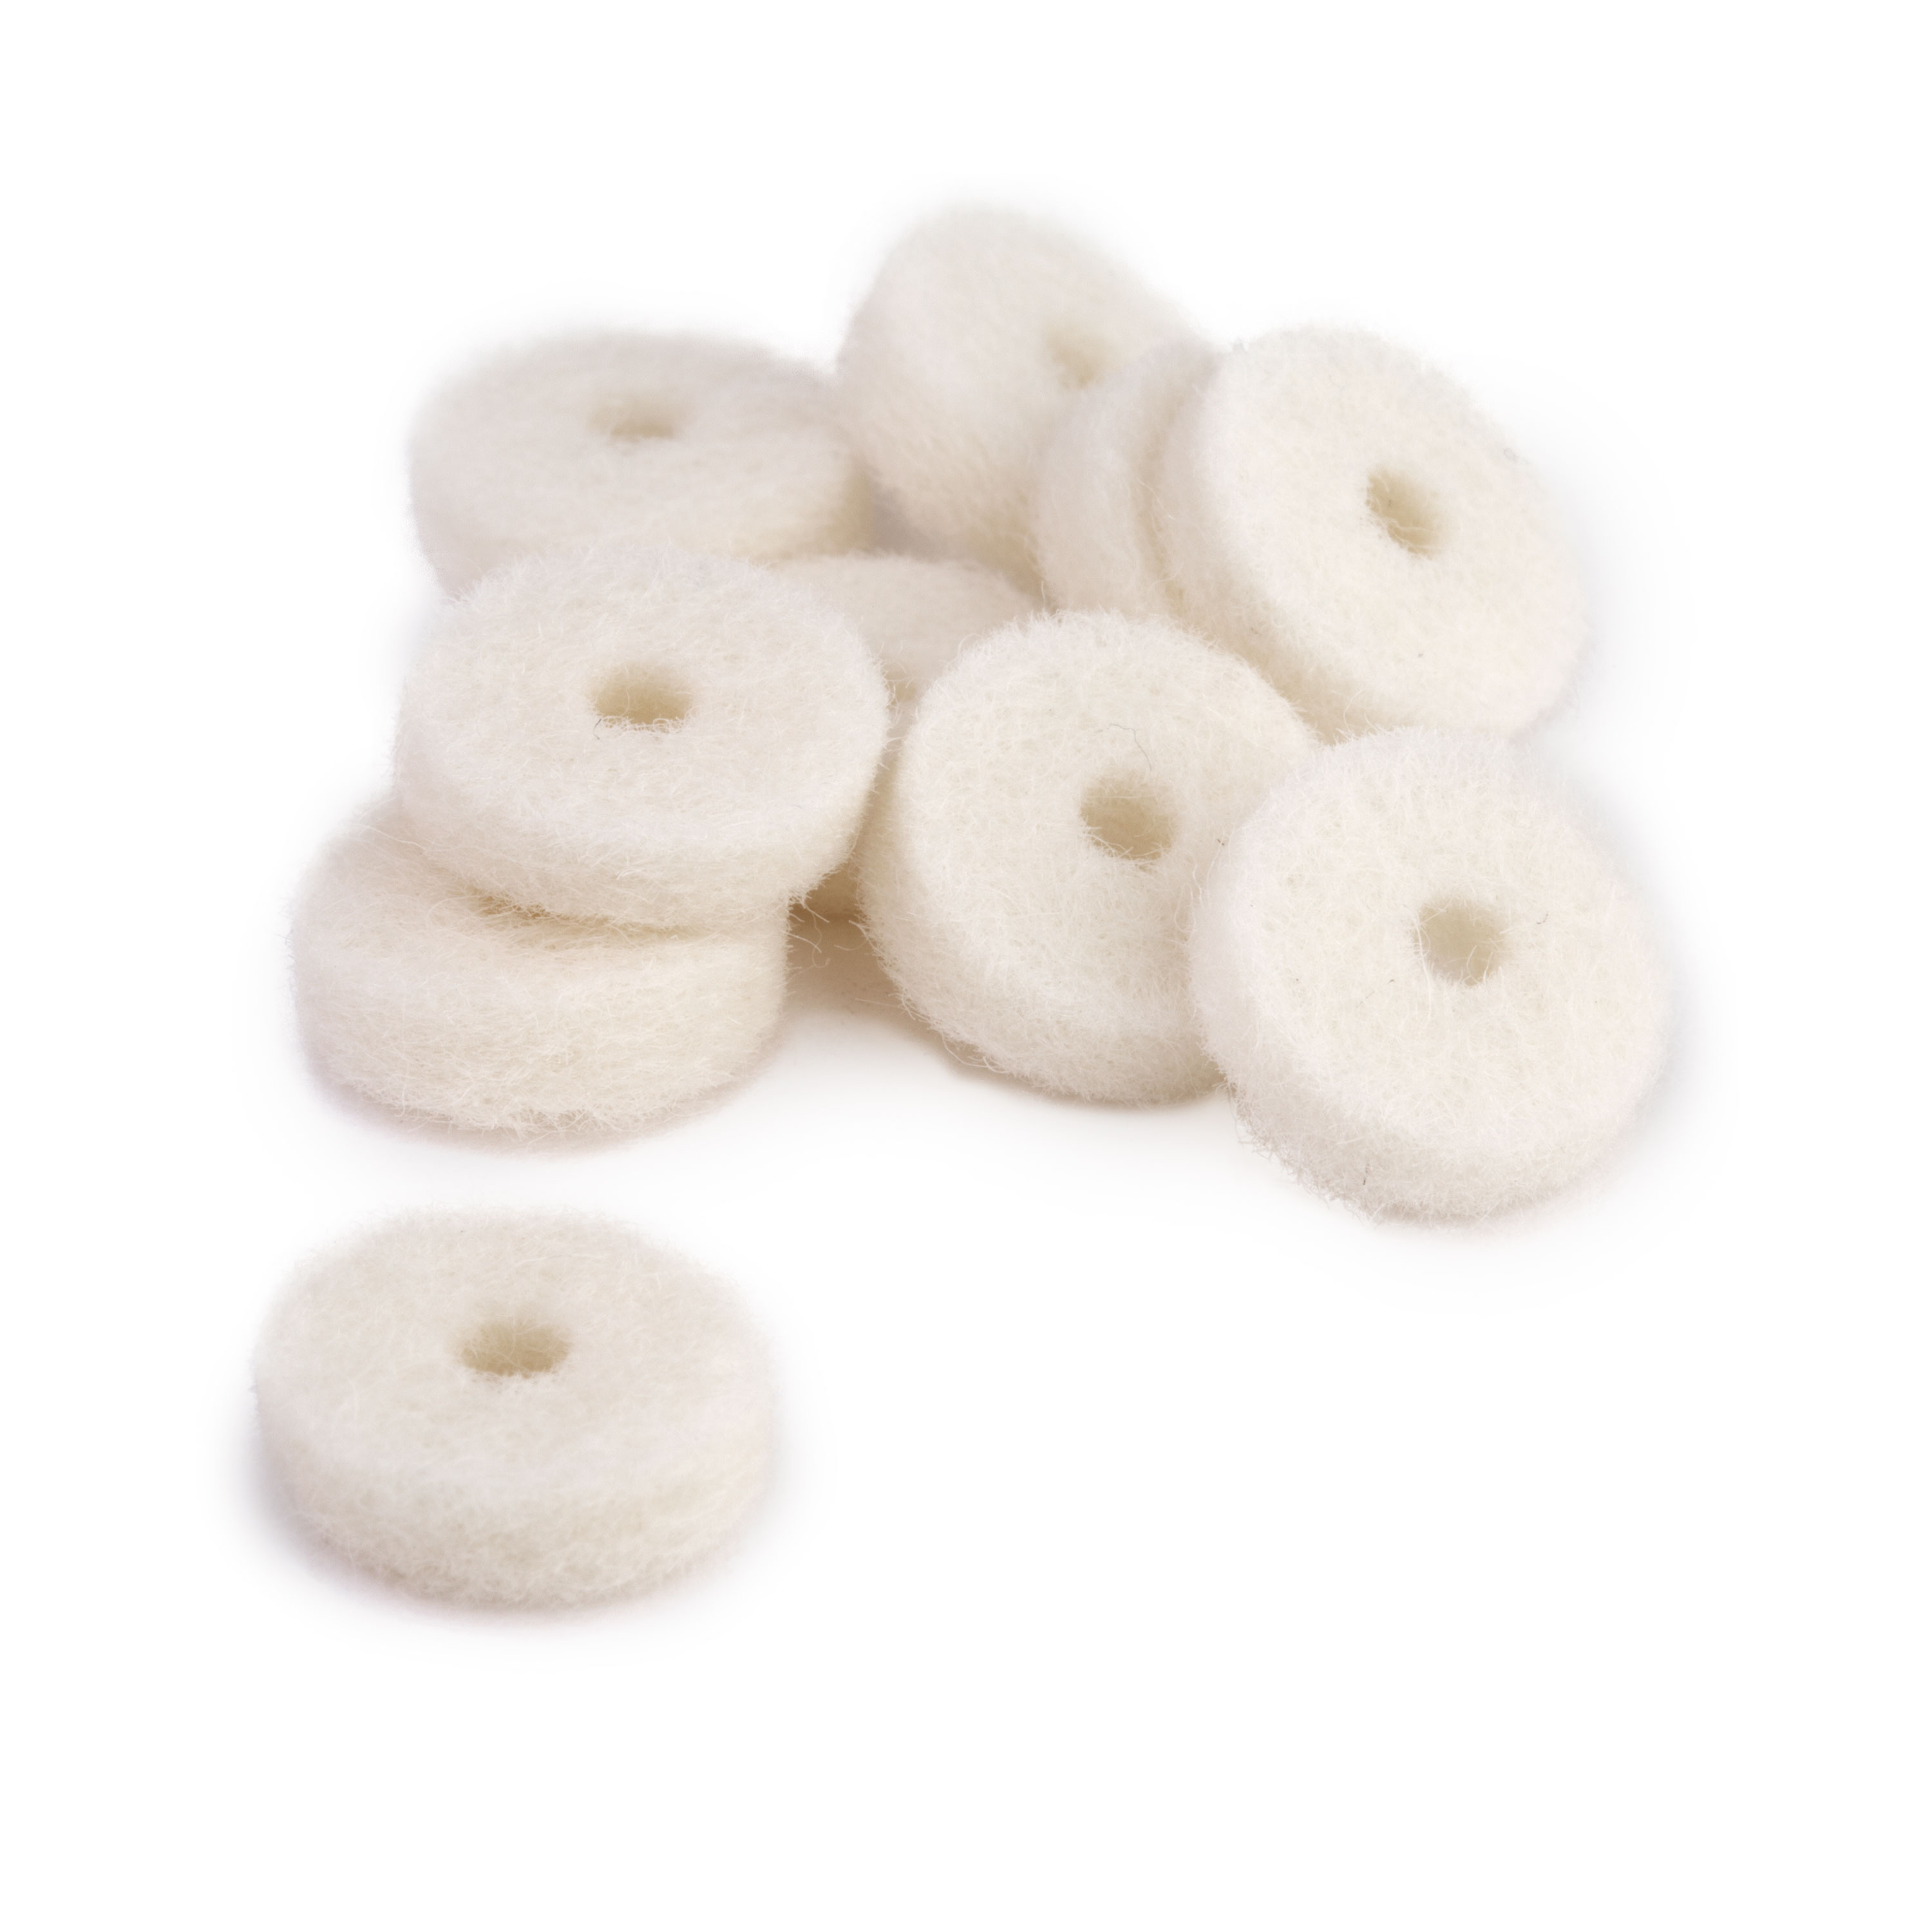 Strap Button Felt Washers - 10 Pack